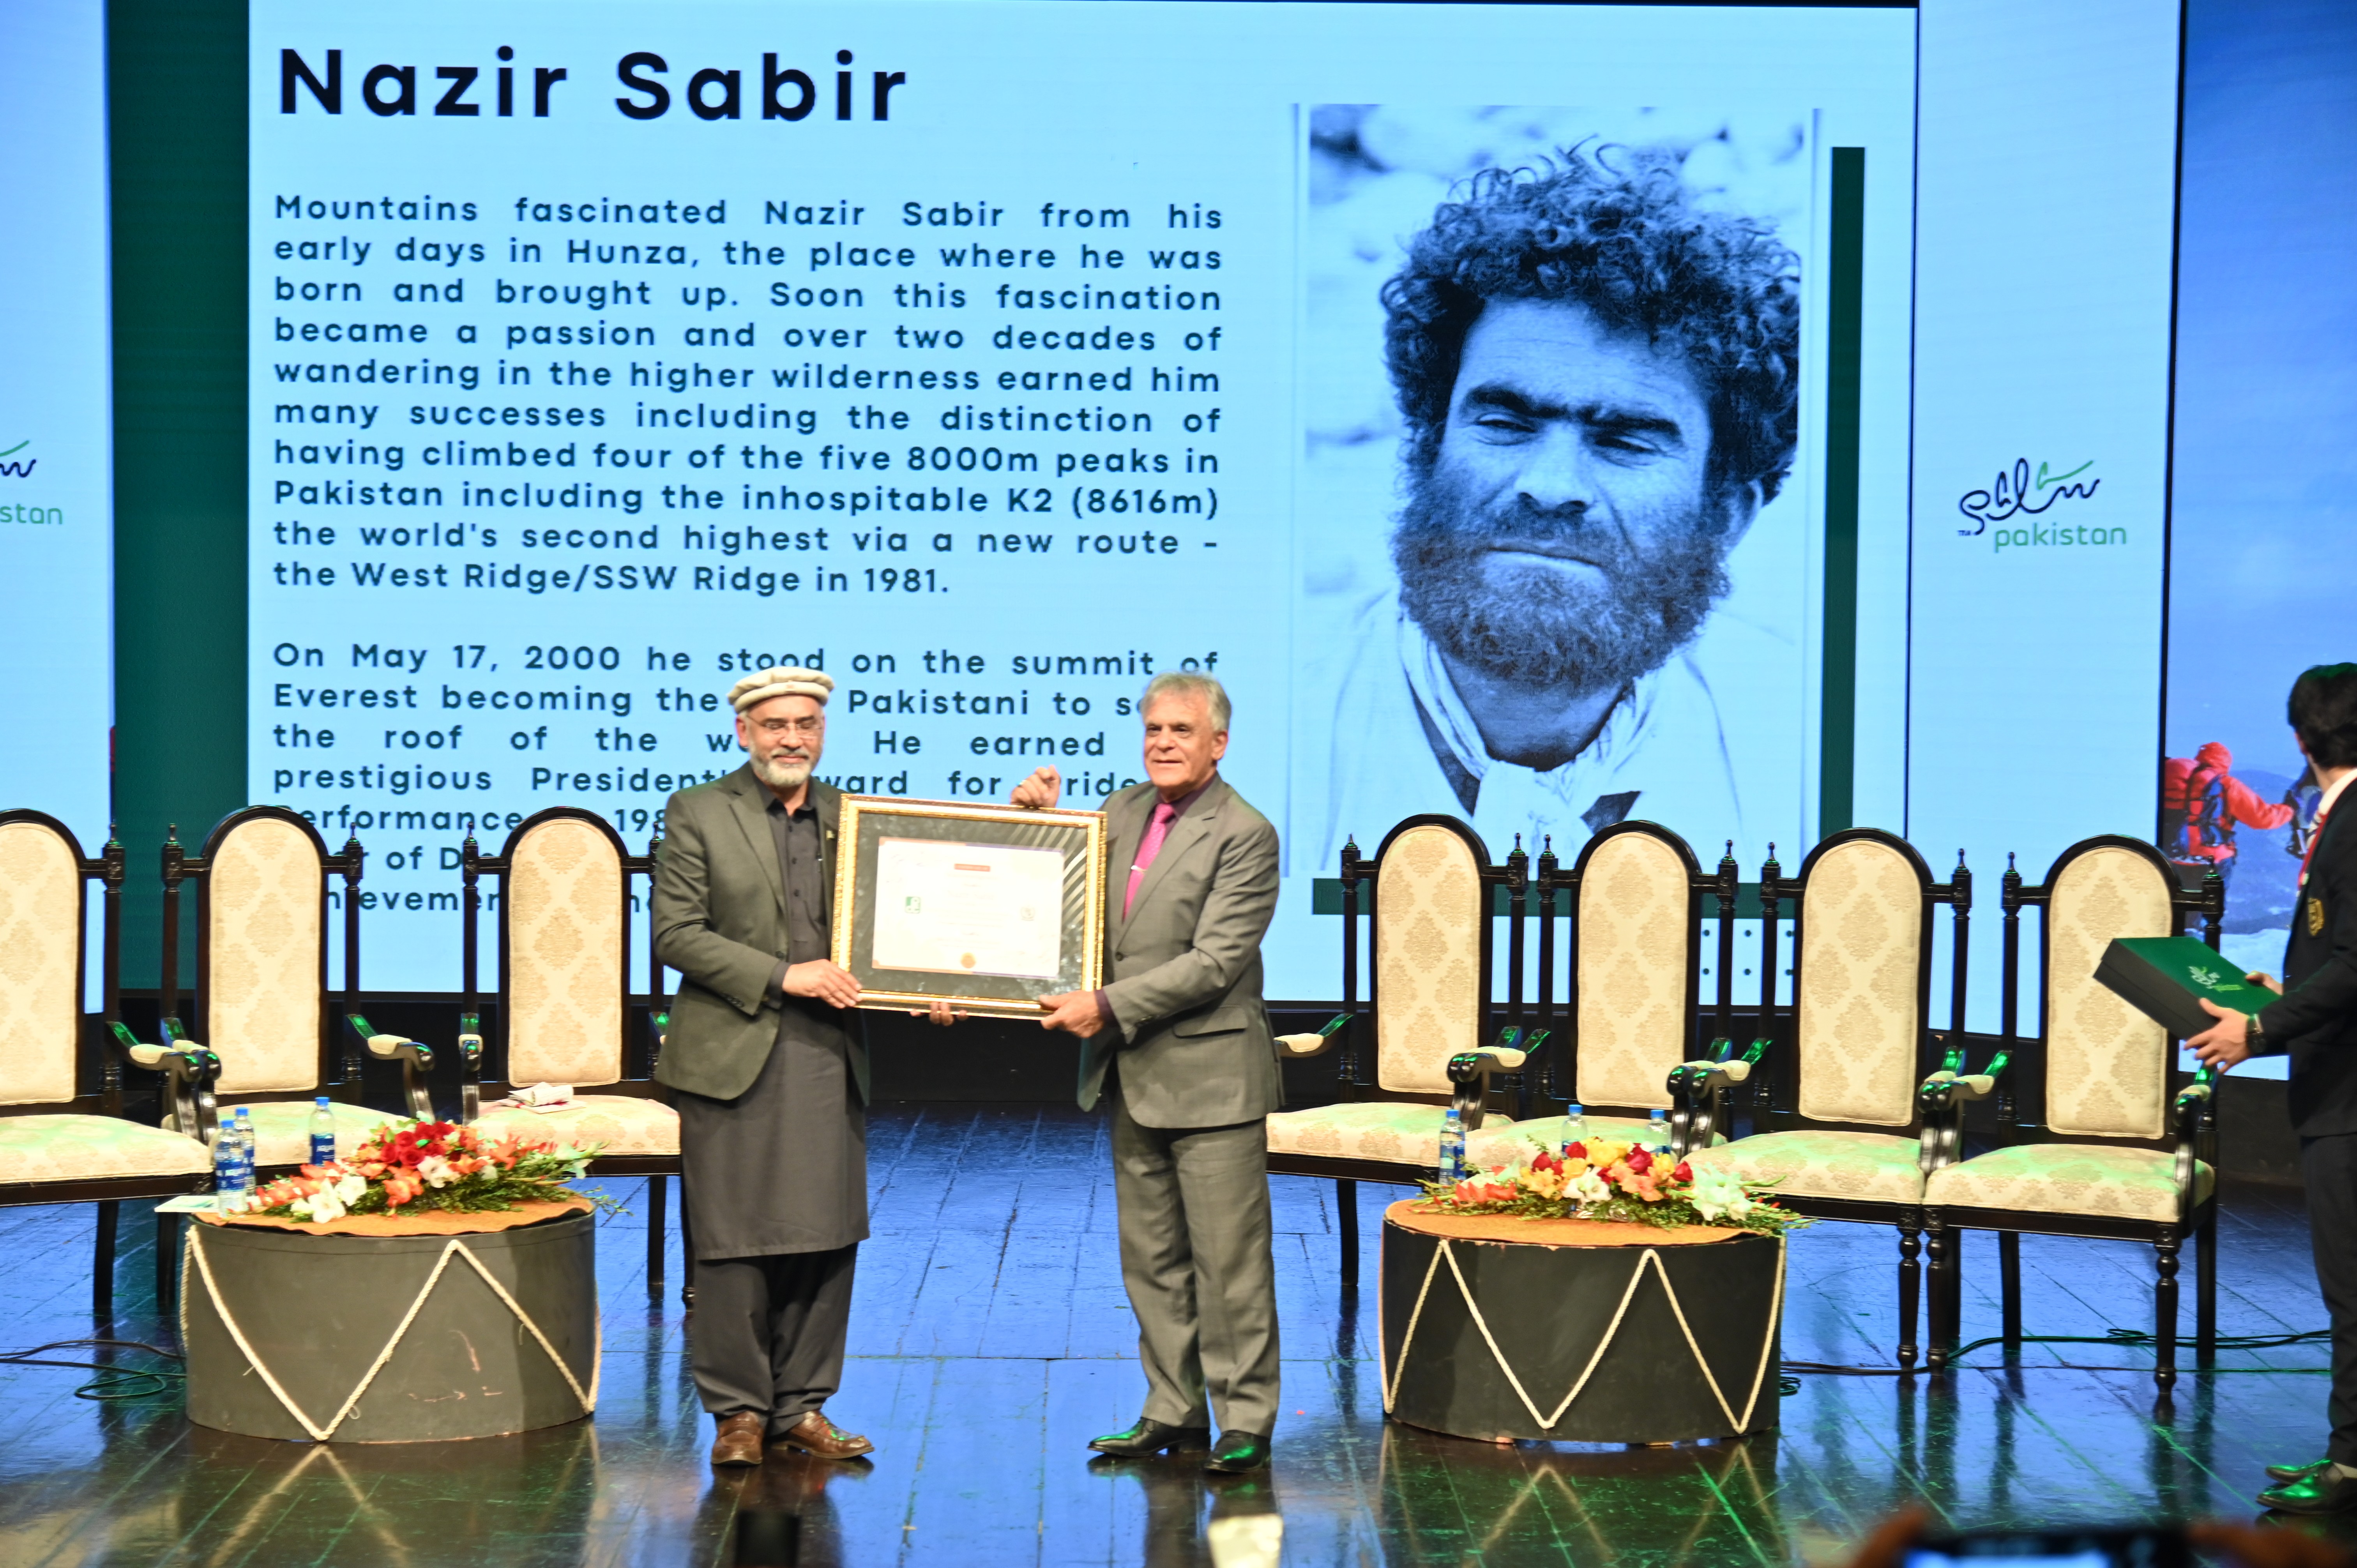 The certificate of acknowledgment presented to Nazir Sabir, a Pakistani mountaineer from Hunza, He is first Pakistani to climbe Mount Everest and four of the five 8000 m peaks in Pakistan, in